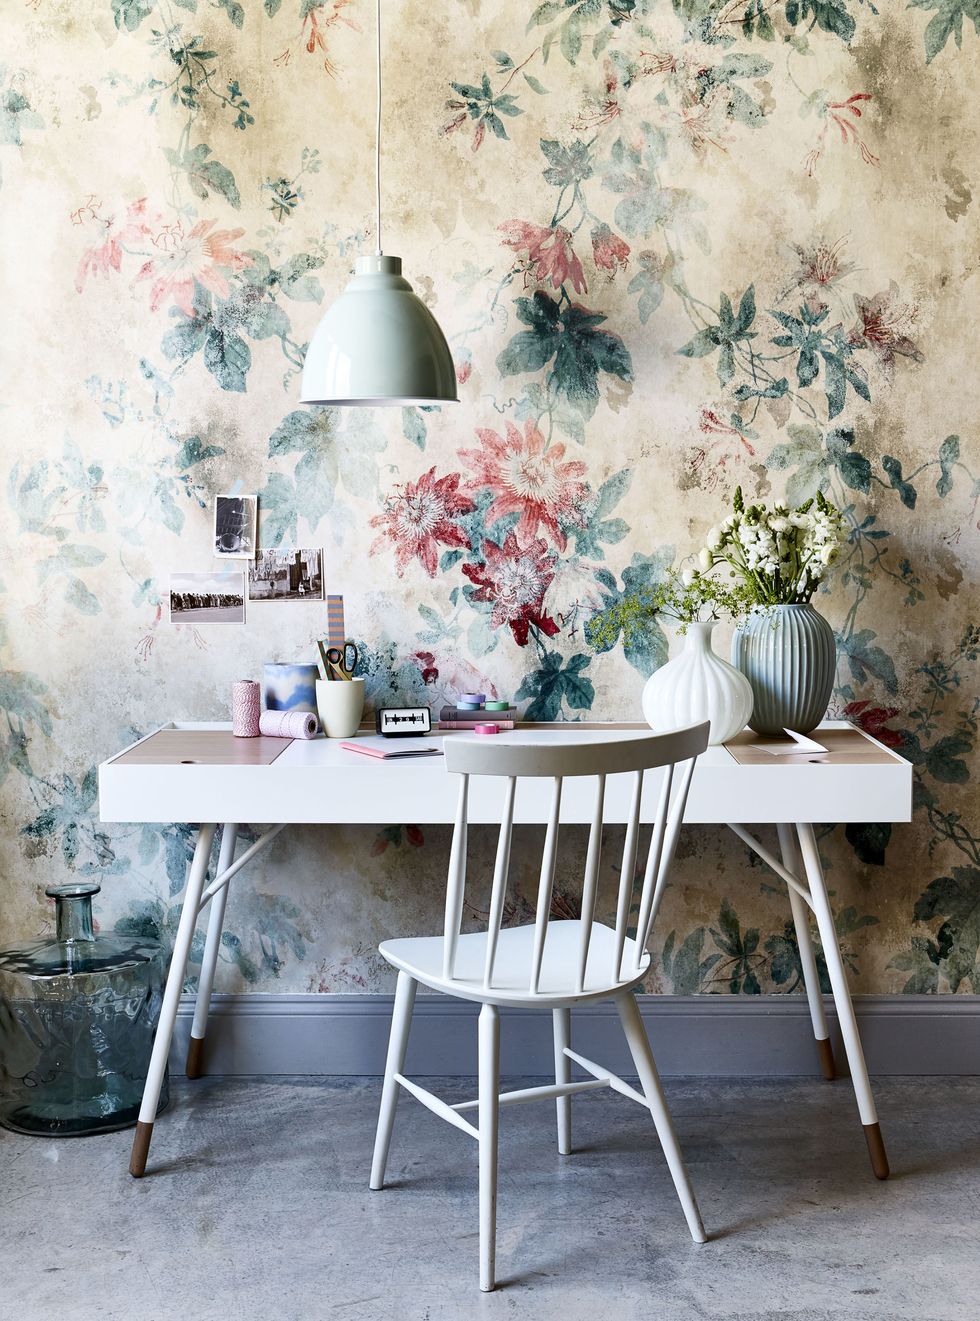 Modern floral wallpaper and furniture